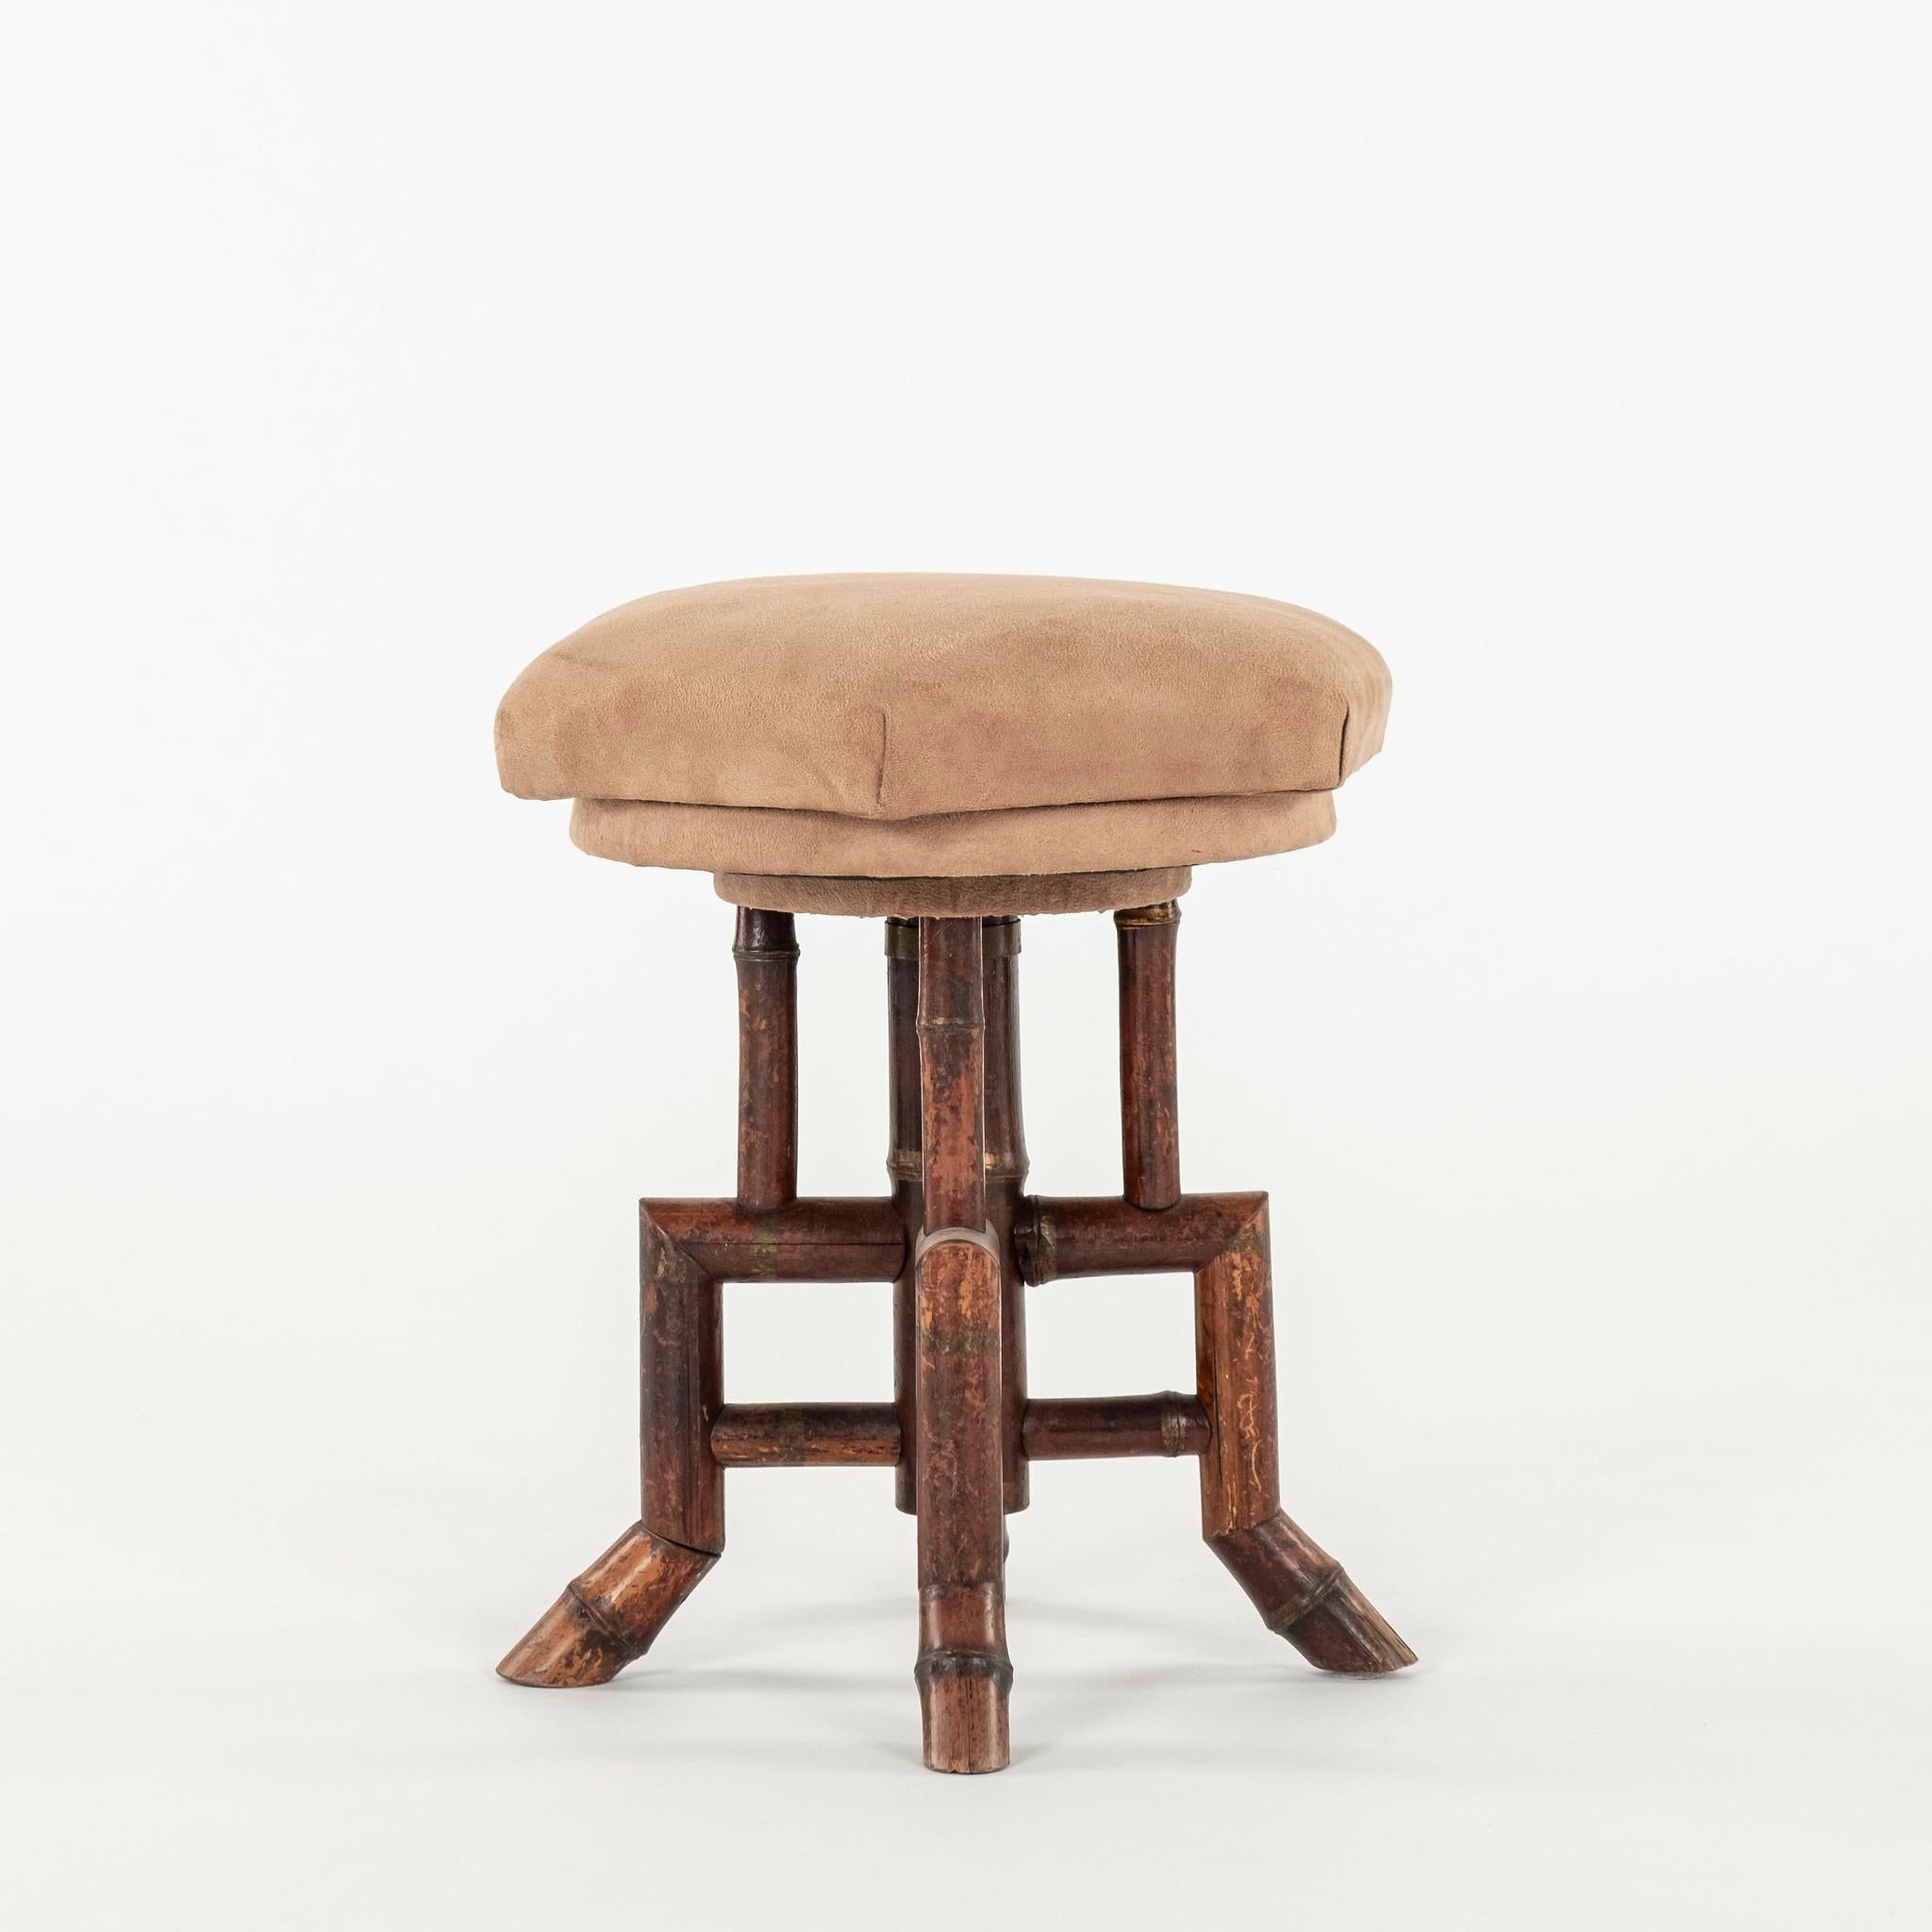 Aesthetic Movement Early 20th Century French Bamboo Swivel Stool For Sale